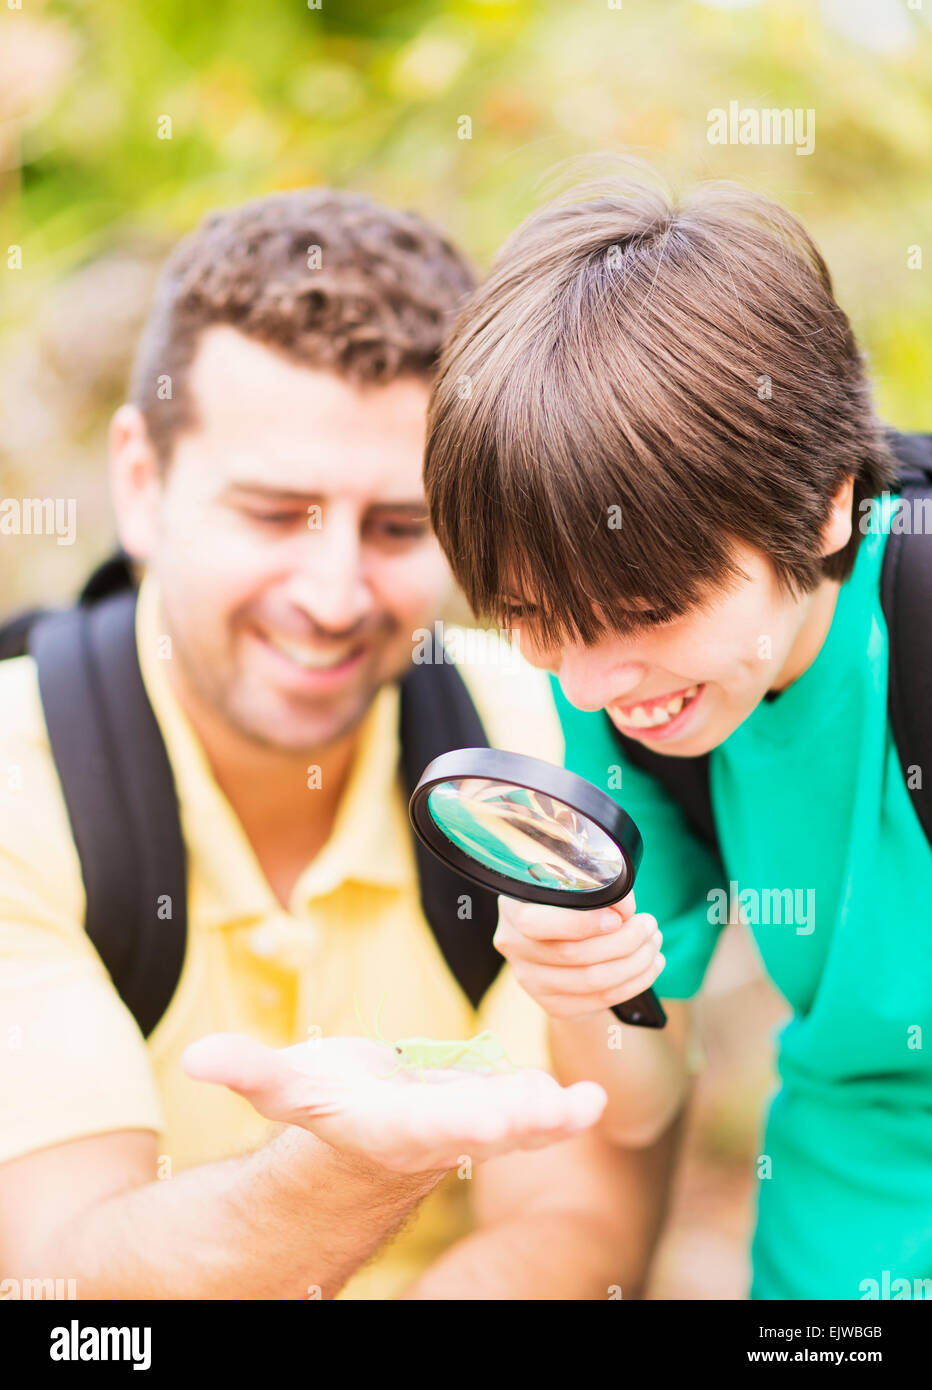 USA, Florida, Jupiter, Father and son (12-13) watching insect with magnifying glass Stock Photo